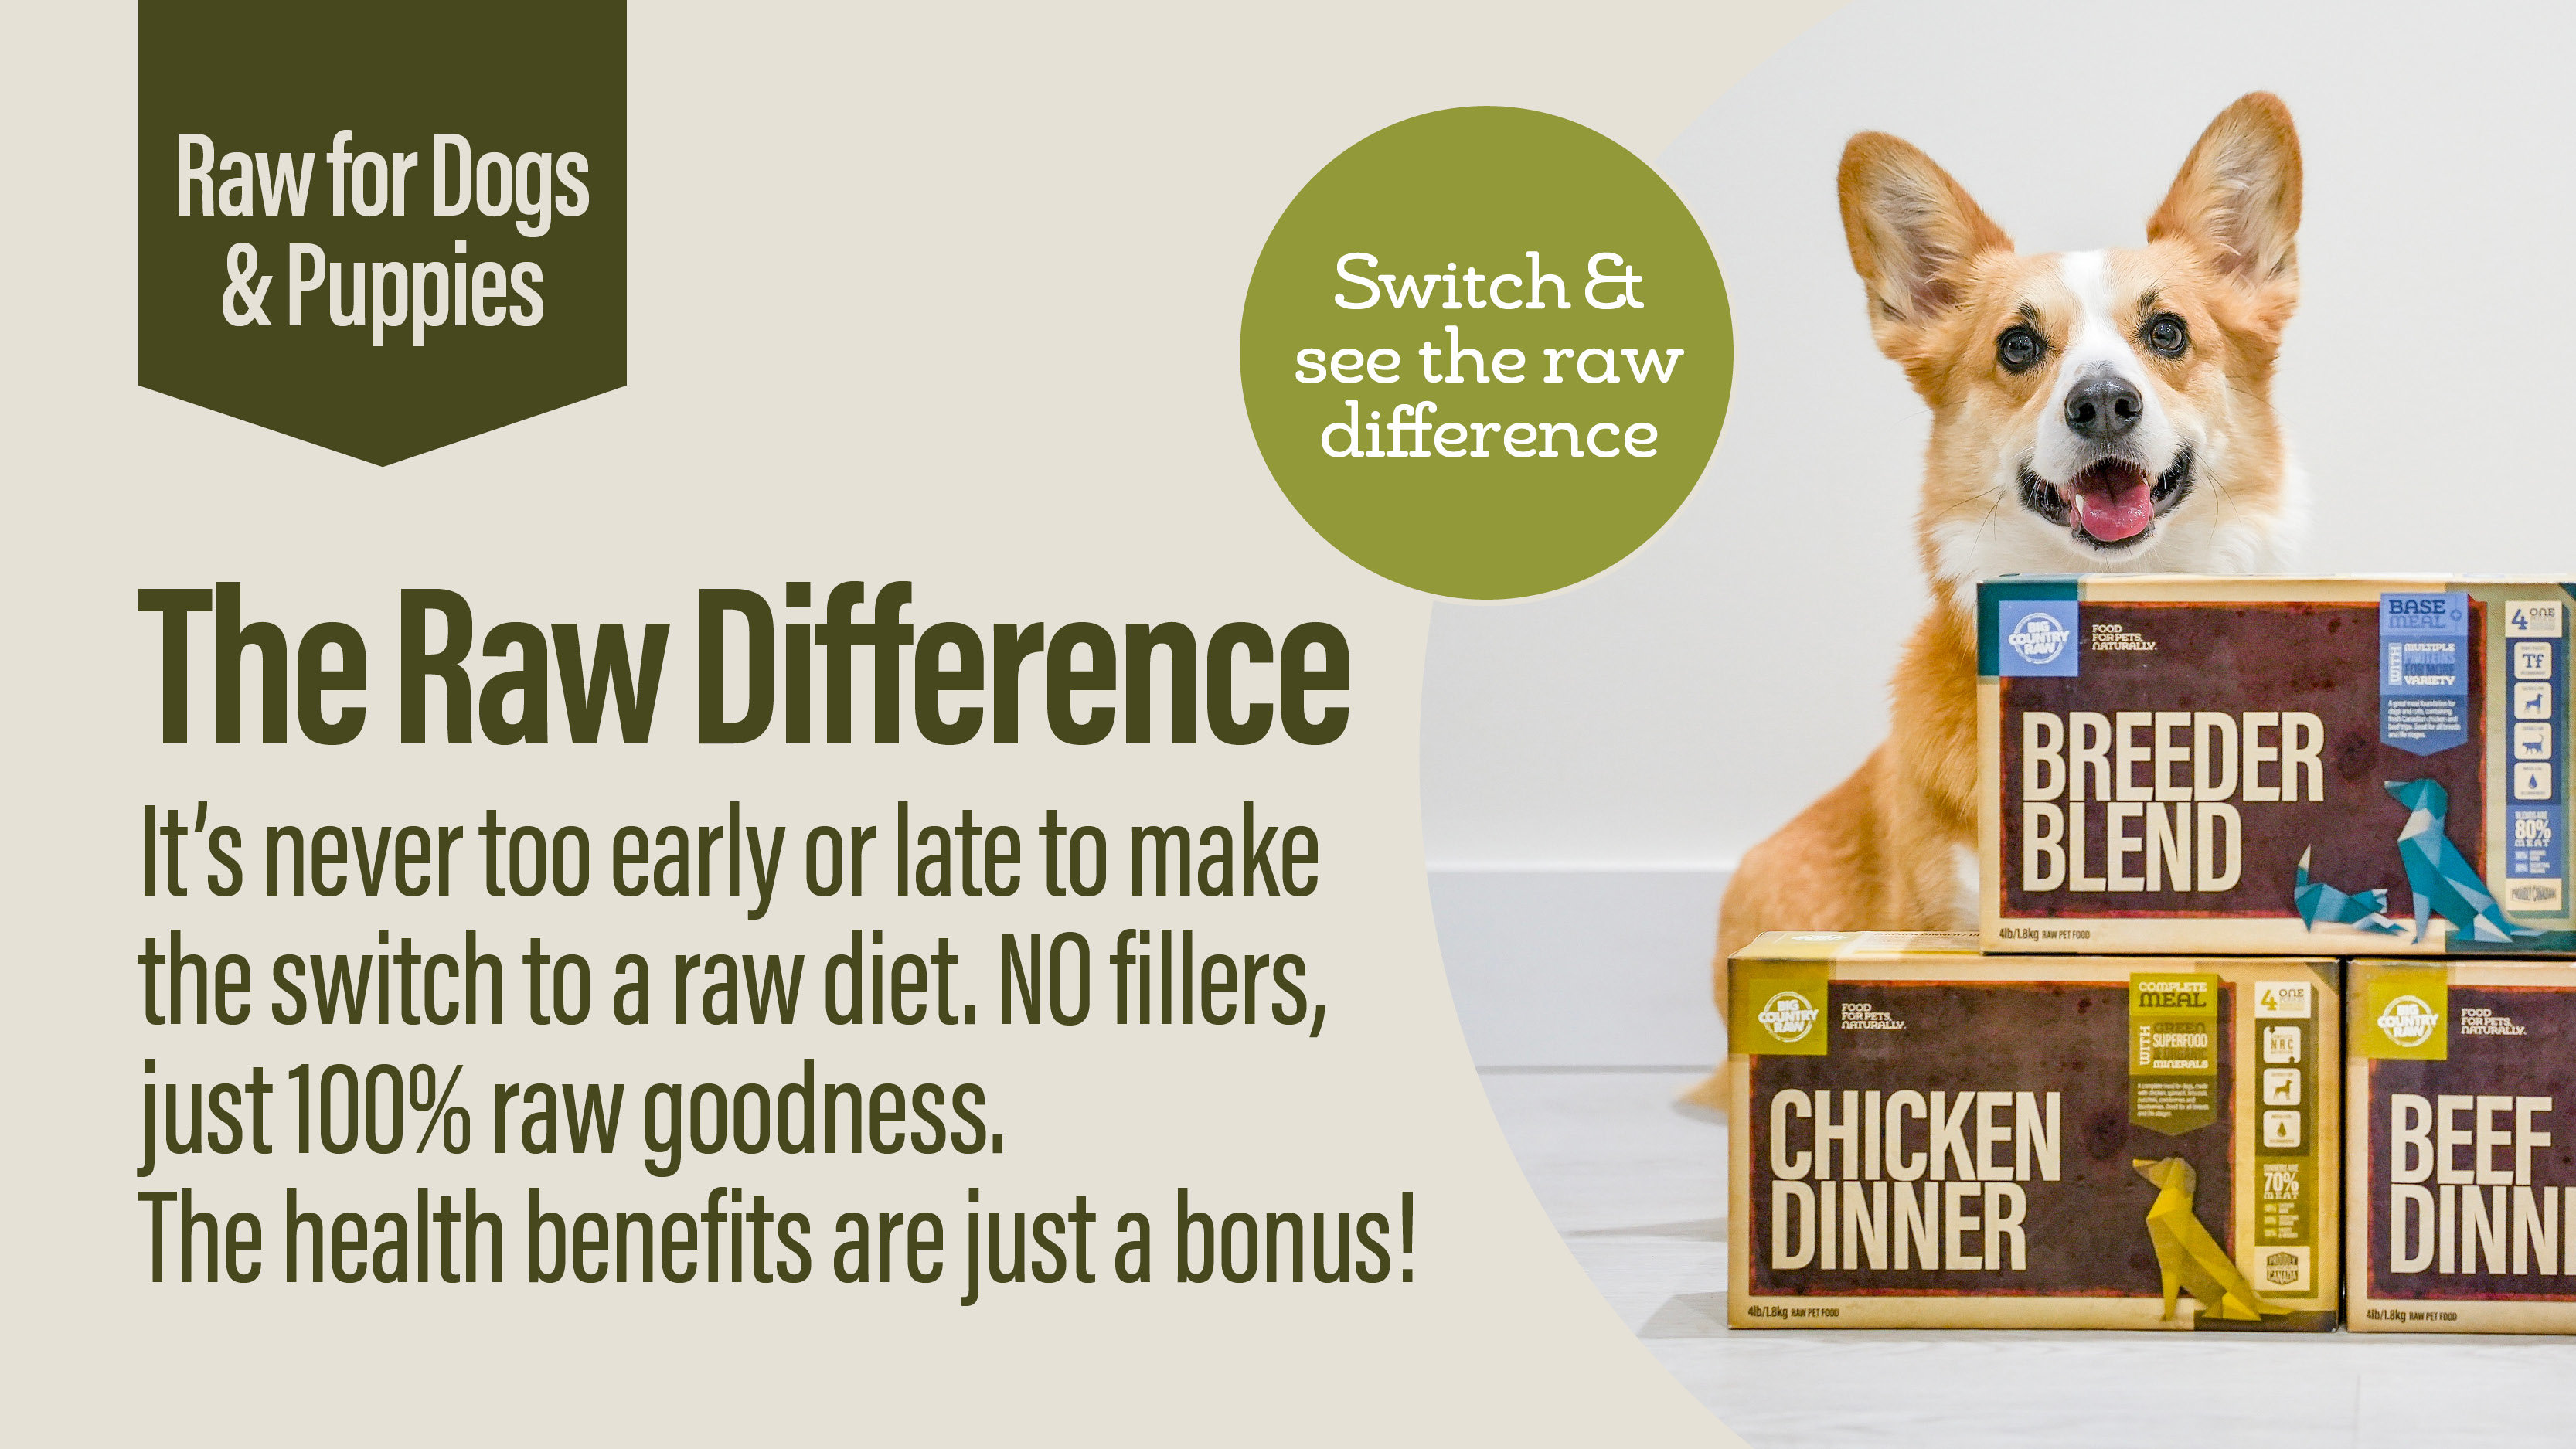 Raw for dogs & puppies - the raw difference - it's never too early or late to make the switch to a raw diet.  No fillers, just 100% raw goodness.  The health benefits are just a bonus! - Switch & see the raw difference 